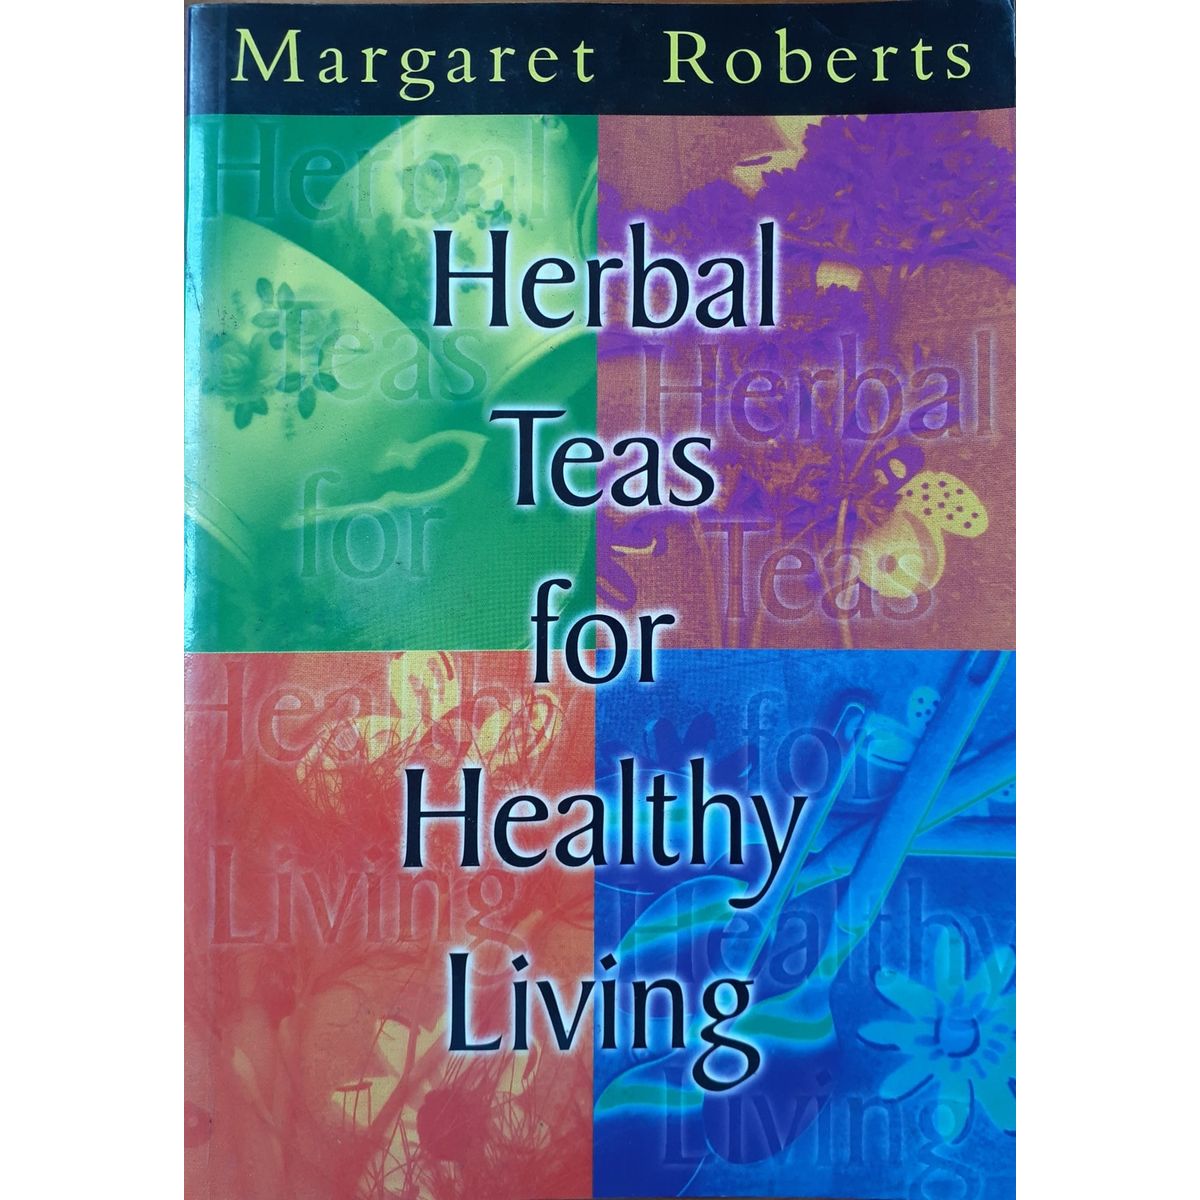 ISBN: 9781919780627 / 1919780626 - Herbal Teas for Healthy Living by Margaret Roberts [2000]